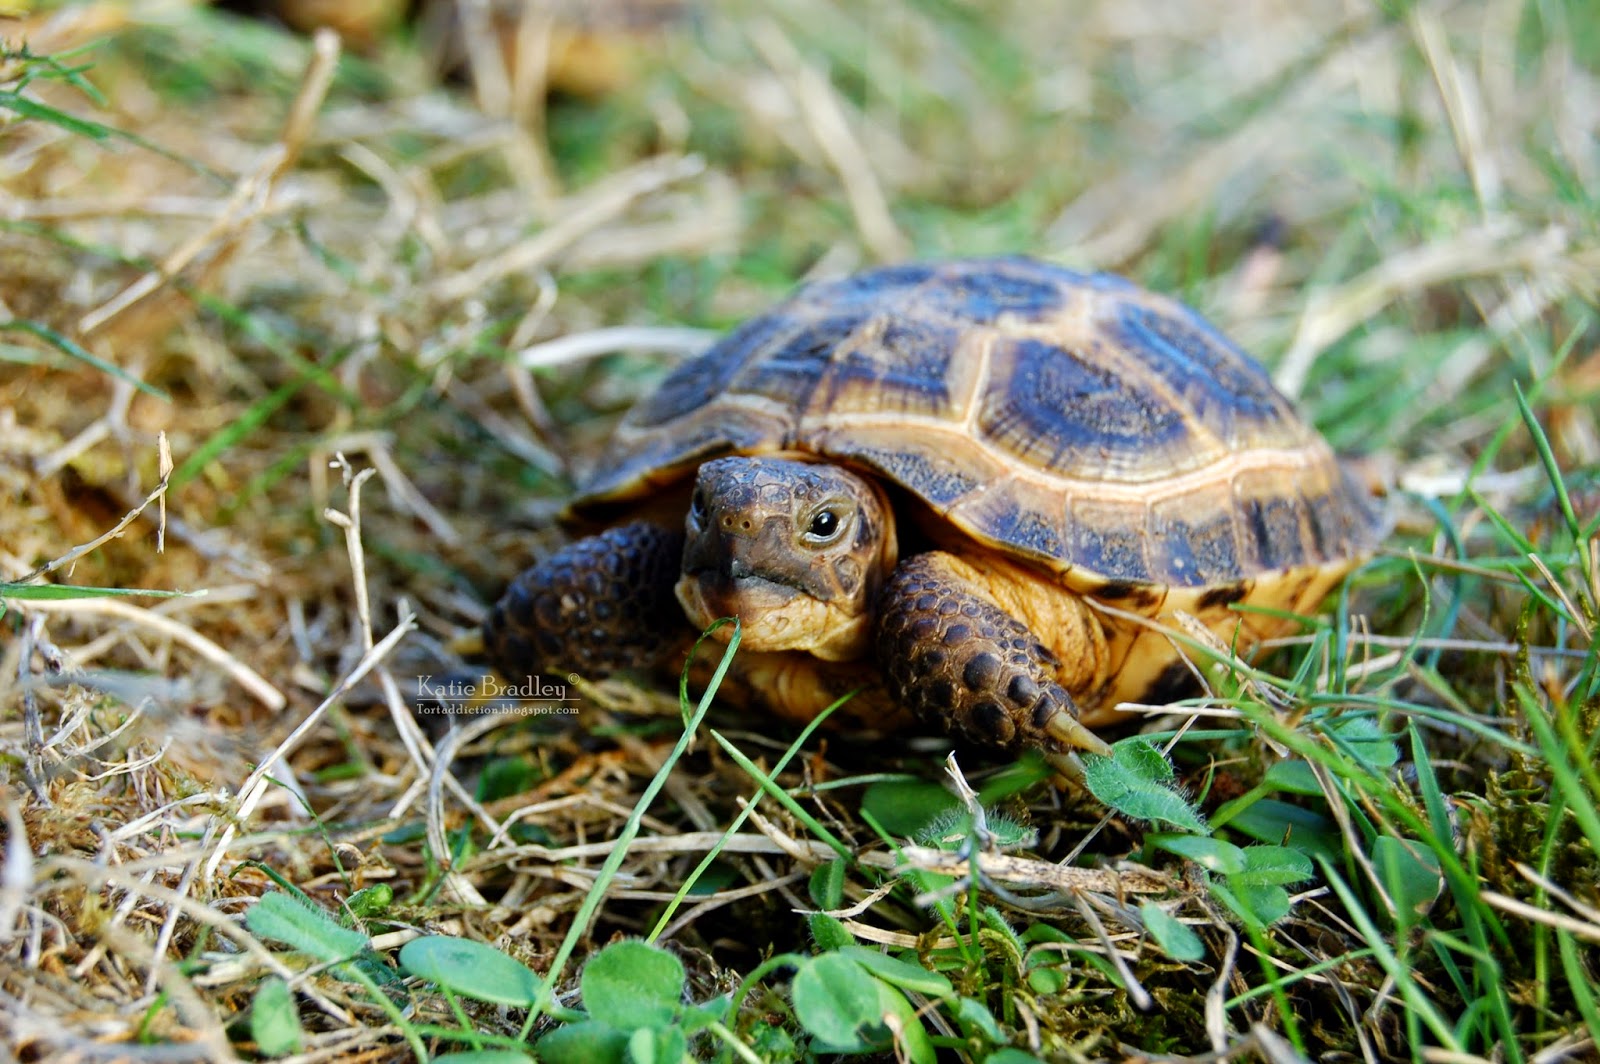 russian tortoise facts